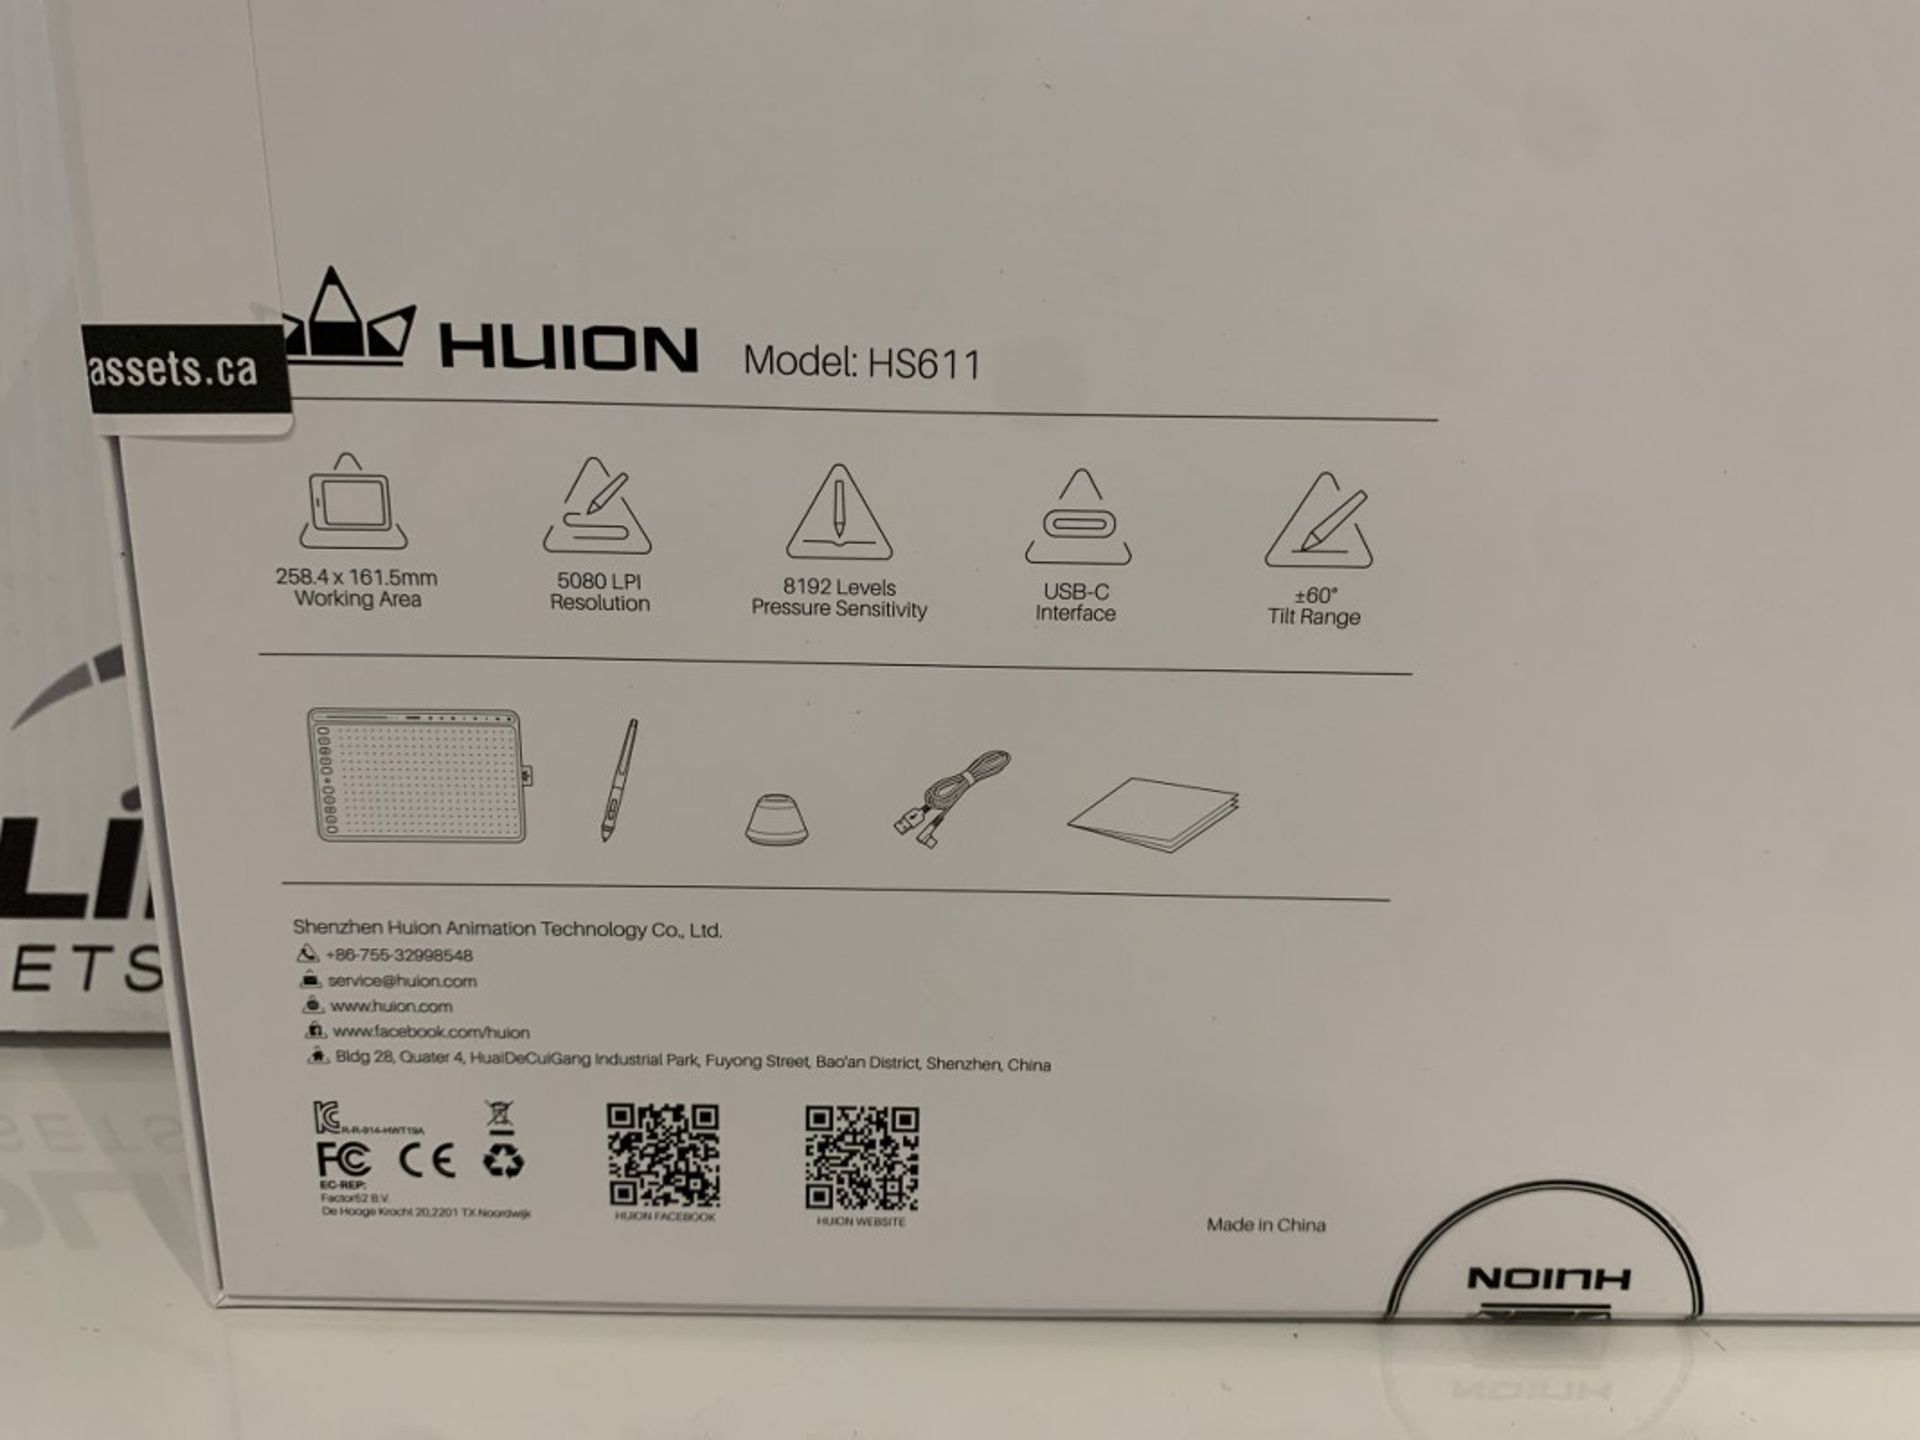 HUION - HS611 CREATIVE PEN TABLET - Image 2 of 3